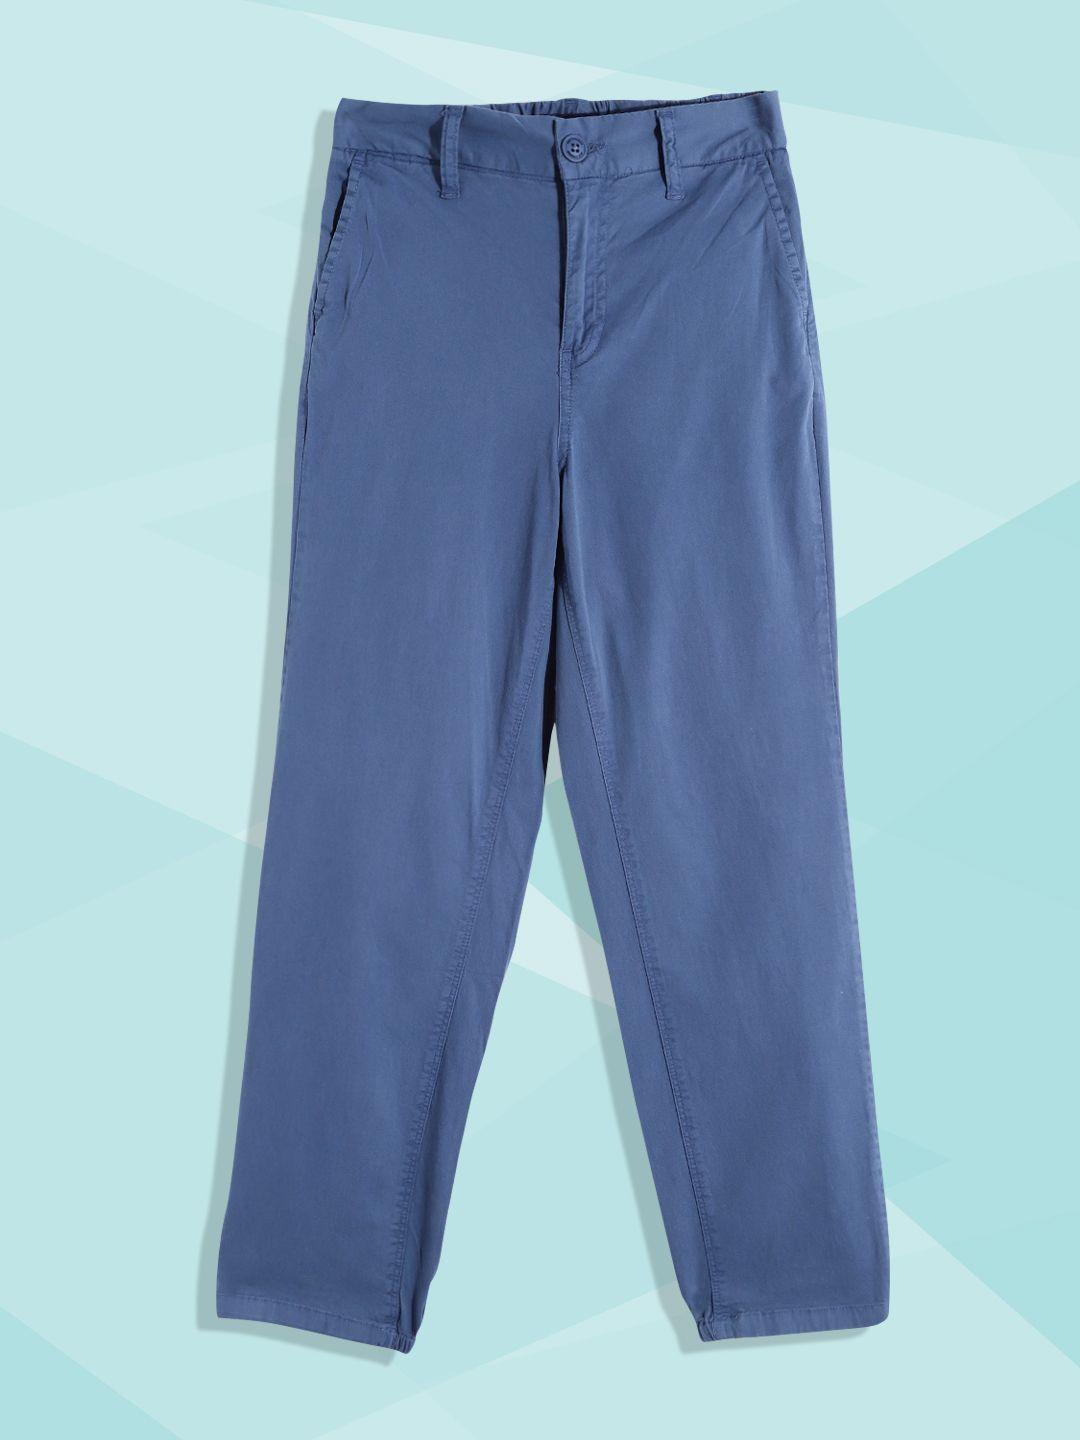 m&h juniors boys blue solid trousers